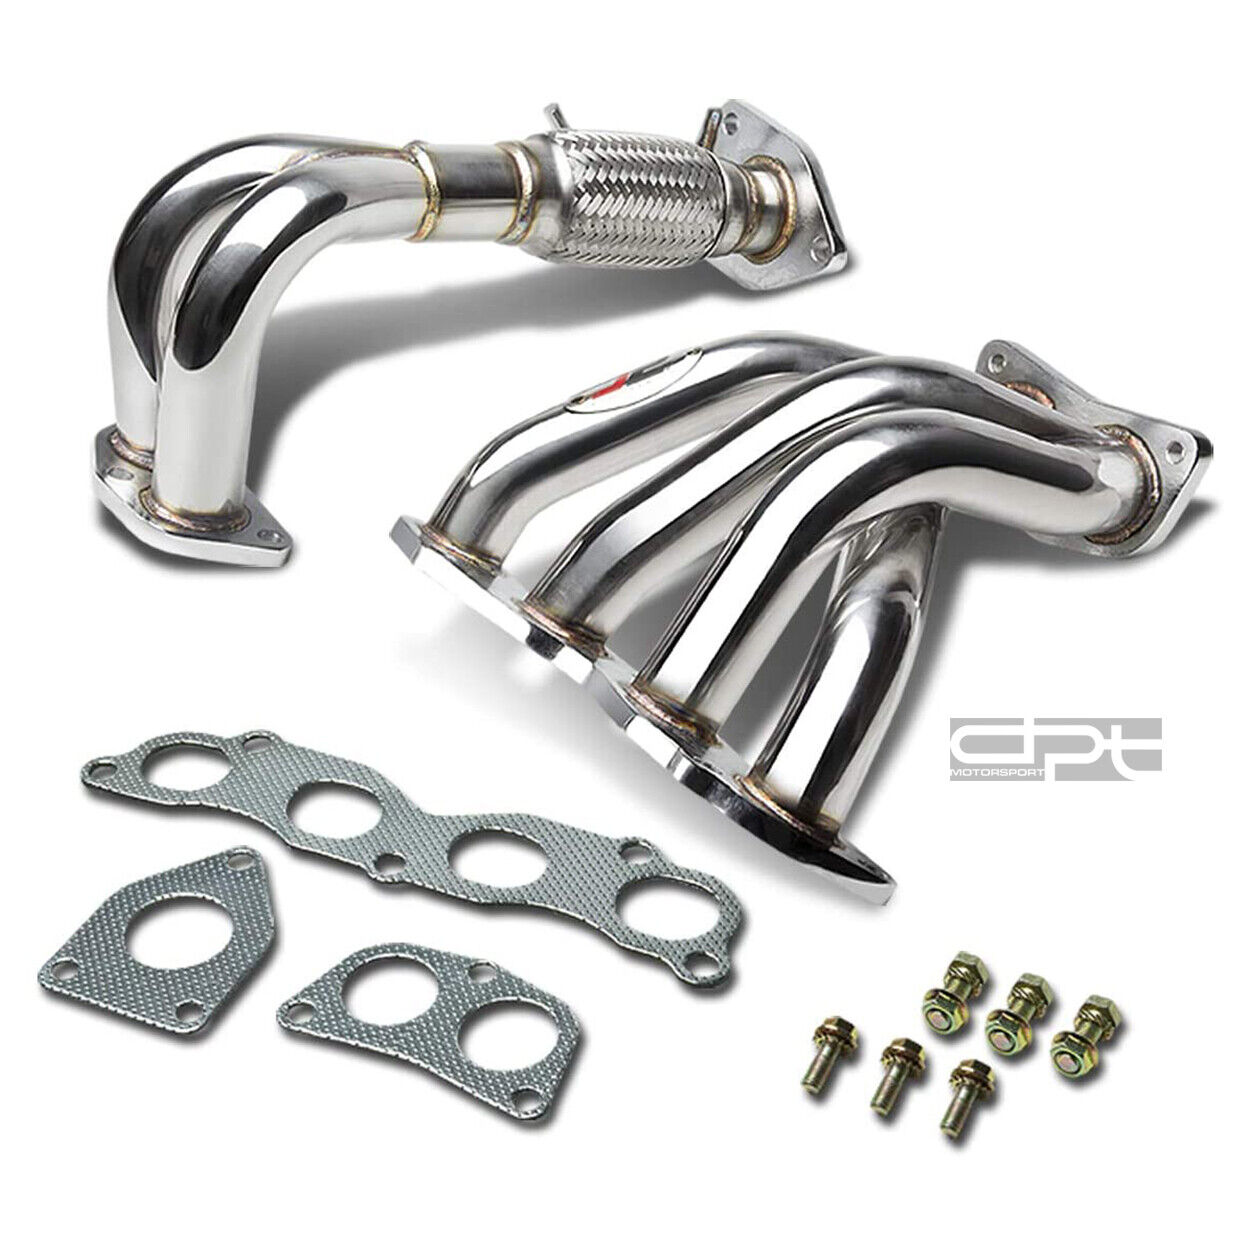 J2 ENGINEERING 4-2-1 SS  EXHAUST MANIFOLD HEADER 04-08 ACURA TSX CL9 2.4L K24A2